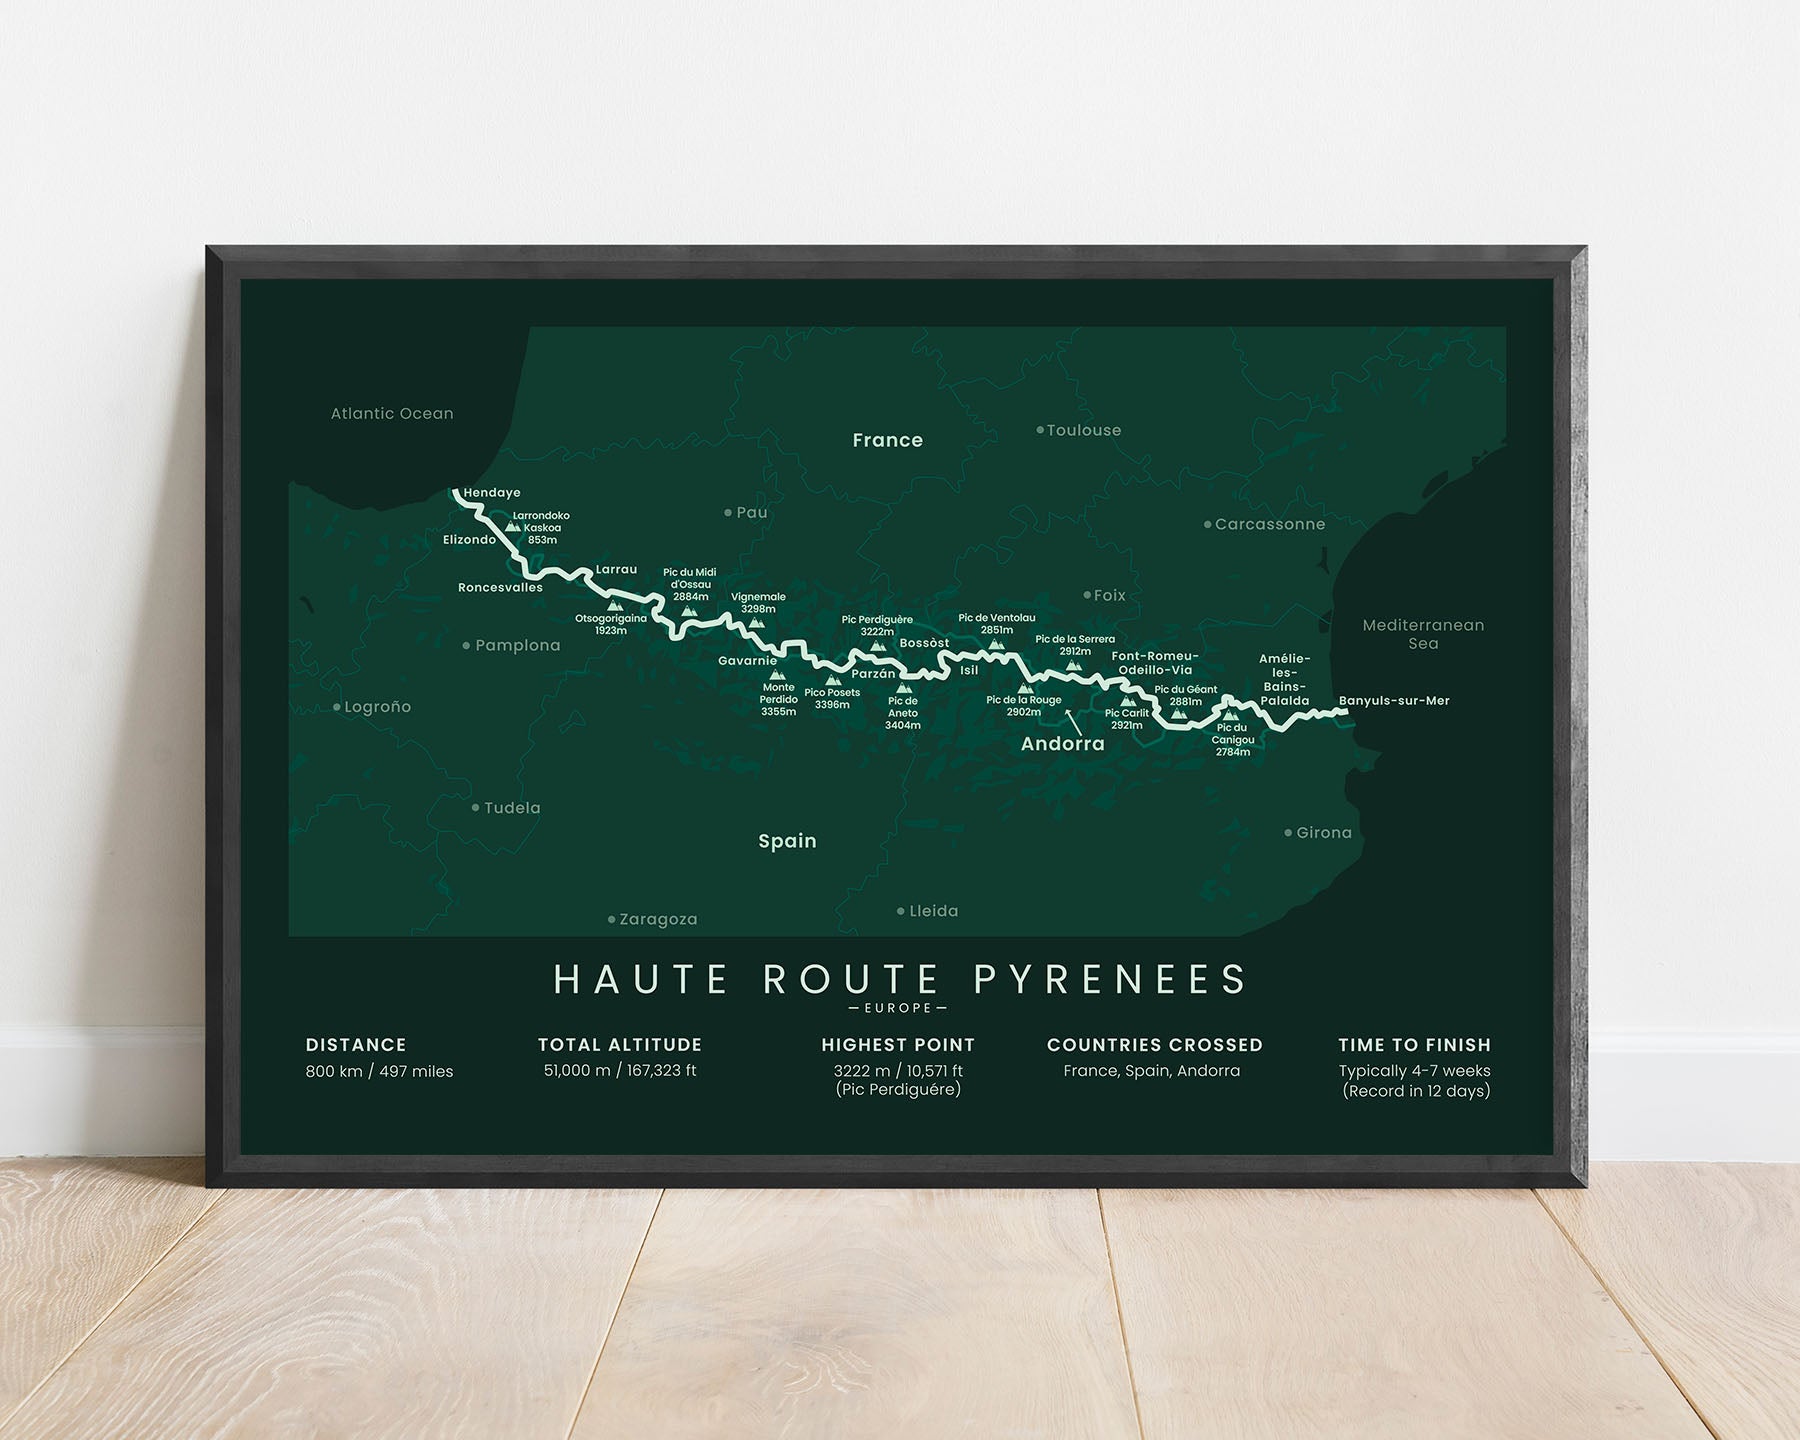 Haute Route Pyrenees trail wall art with green background (Atlantic Ocean to Mediterranean Sea)